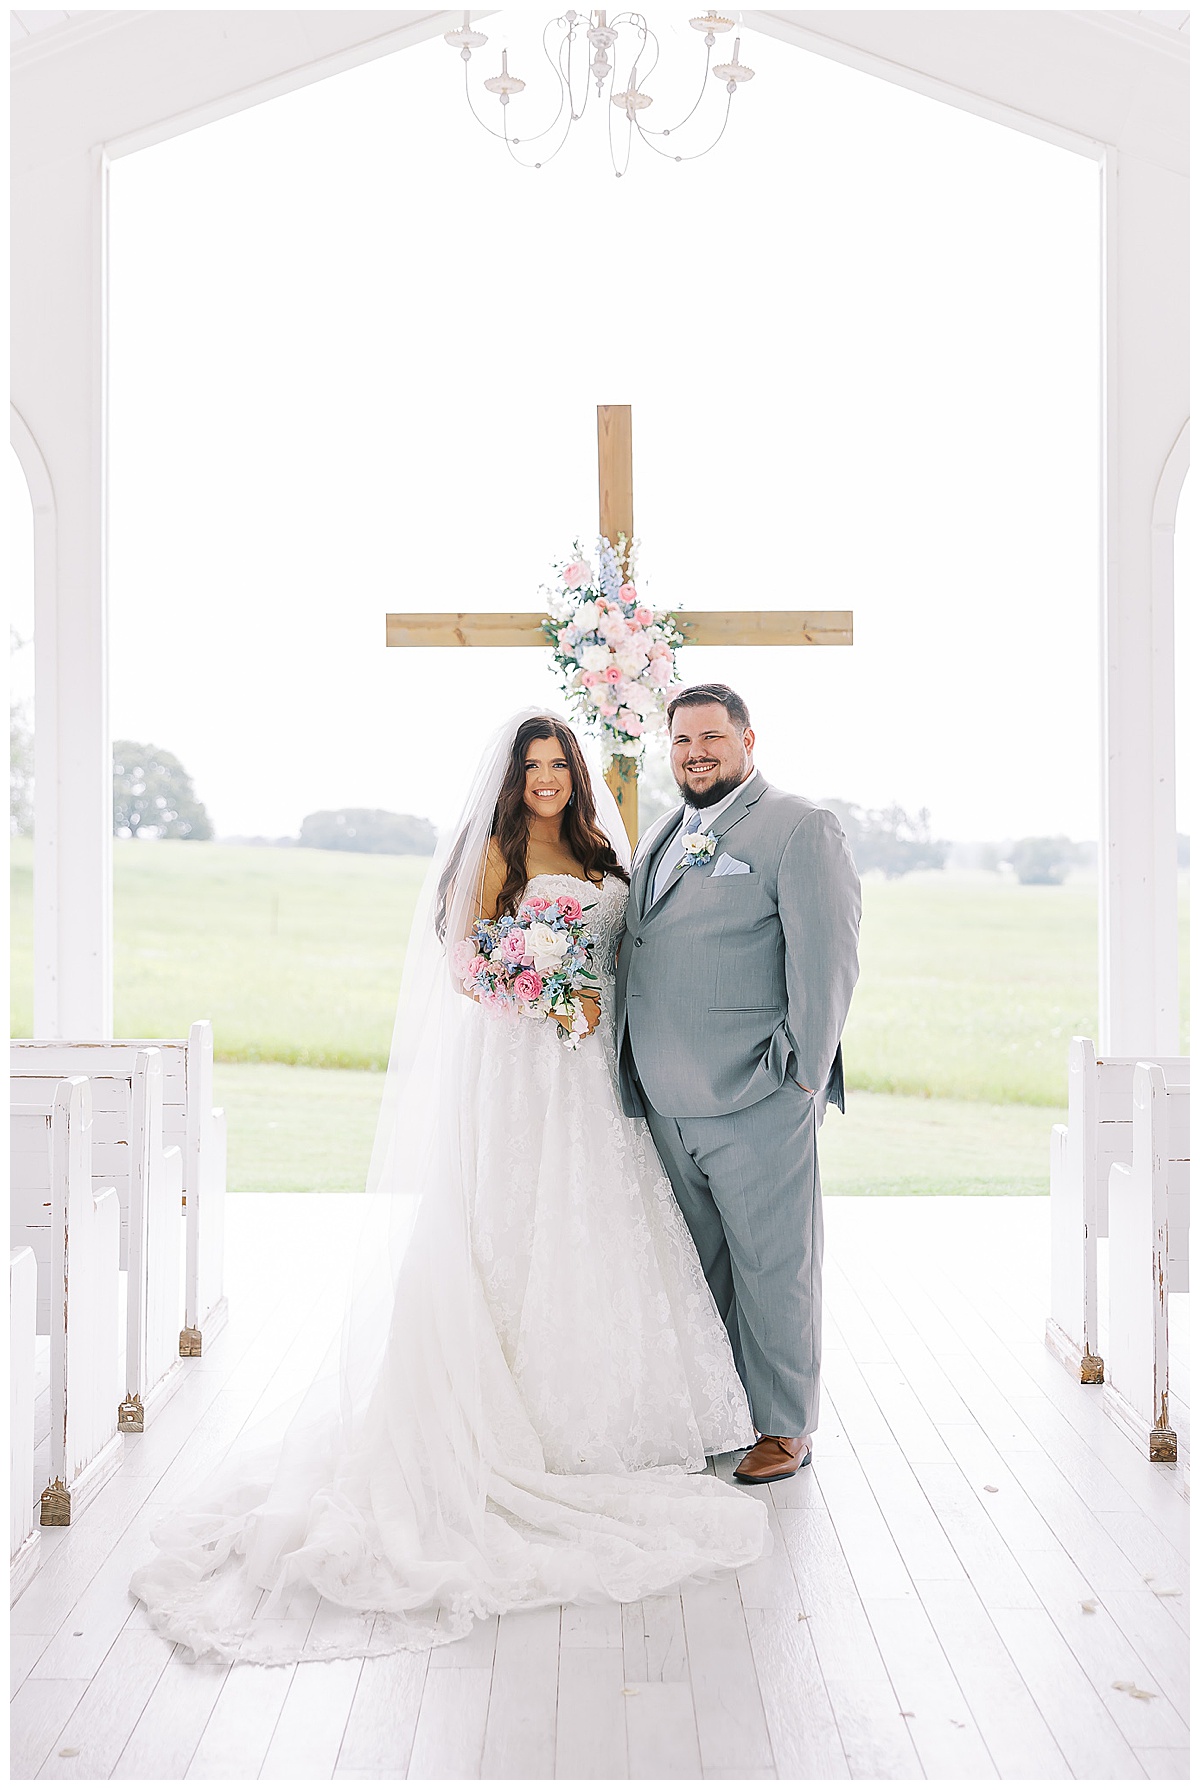 Abby and Conner's wedding at Chandelier Farms in Terrell TX. #weddingphotographer #dallasweddingphotographer #chandelierfarmswedding